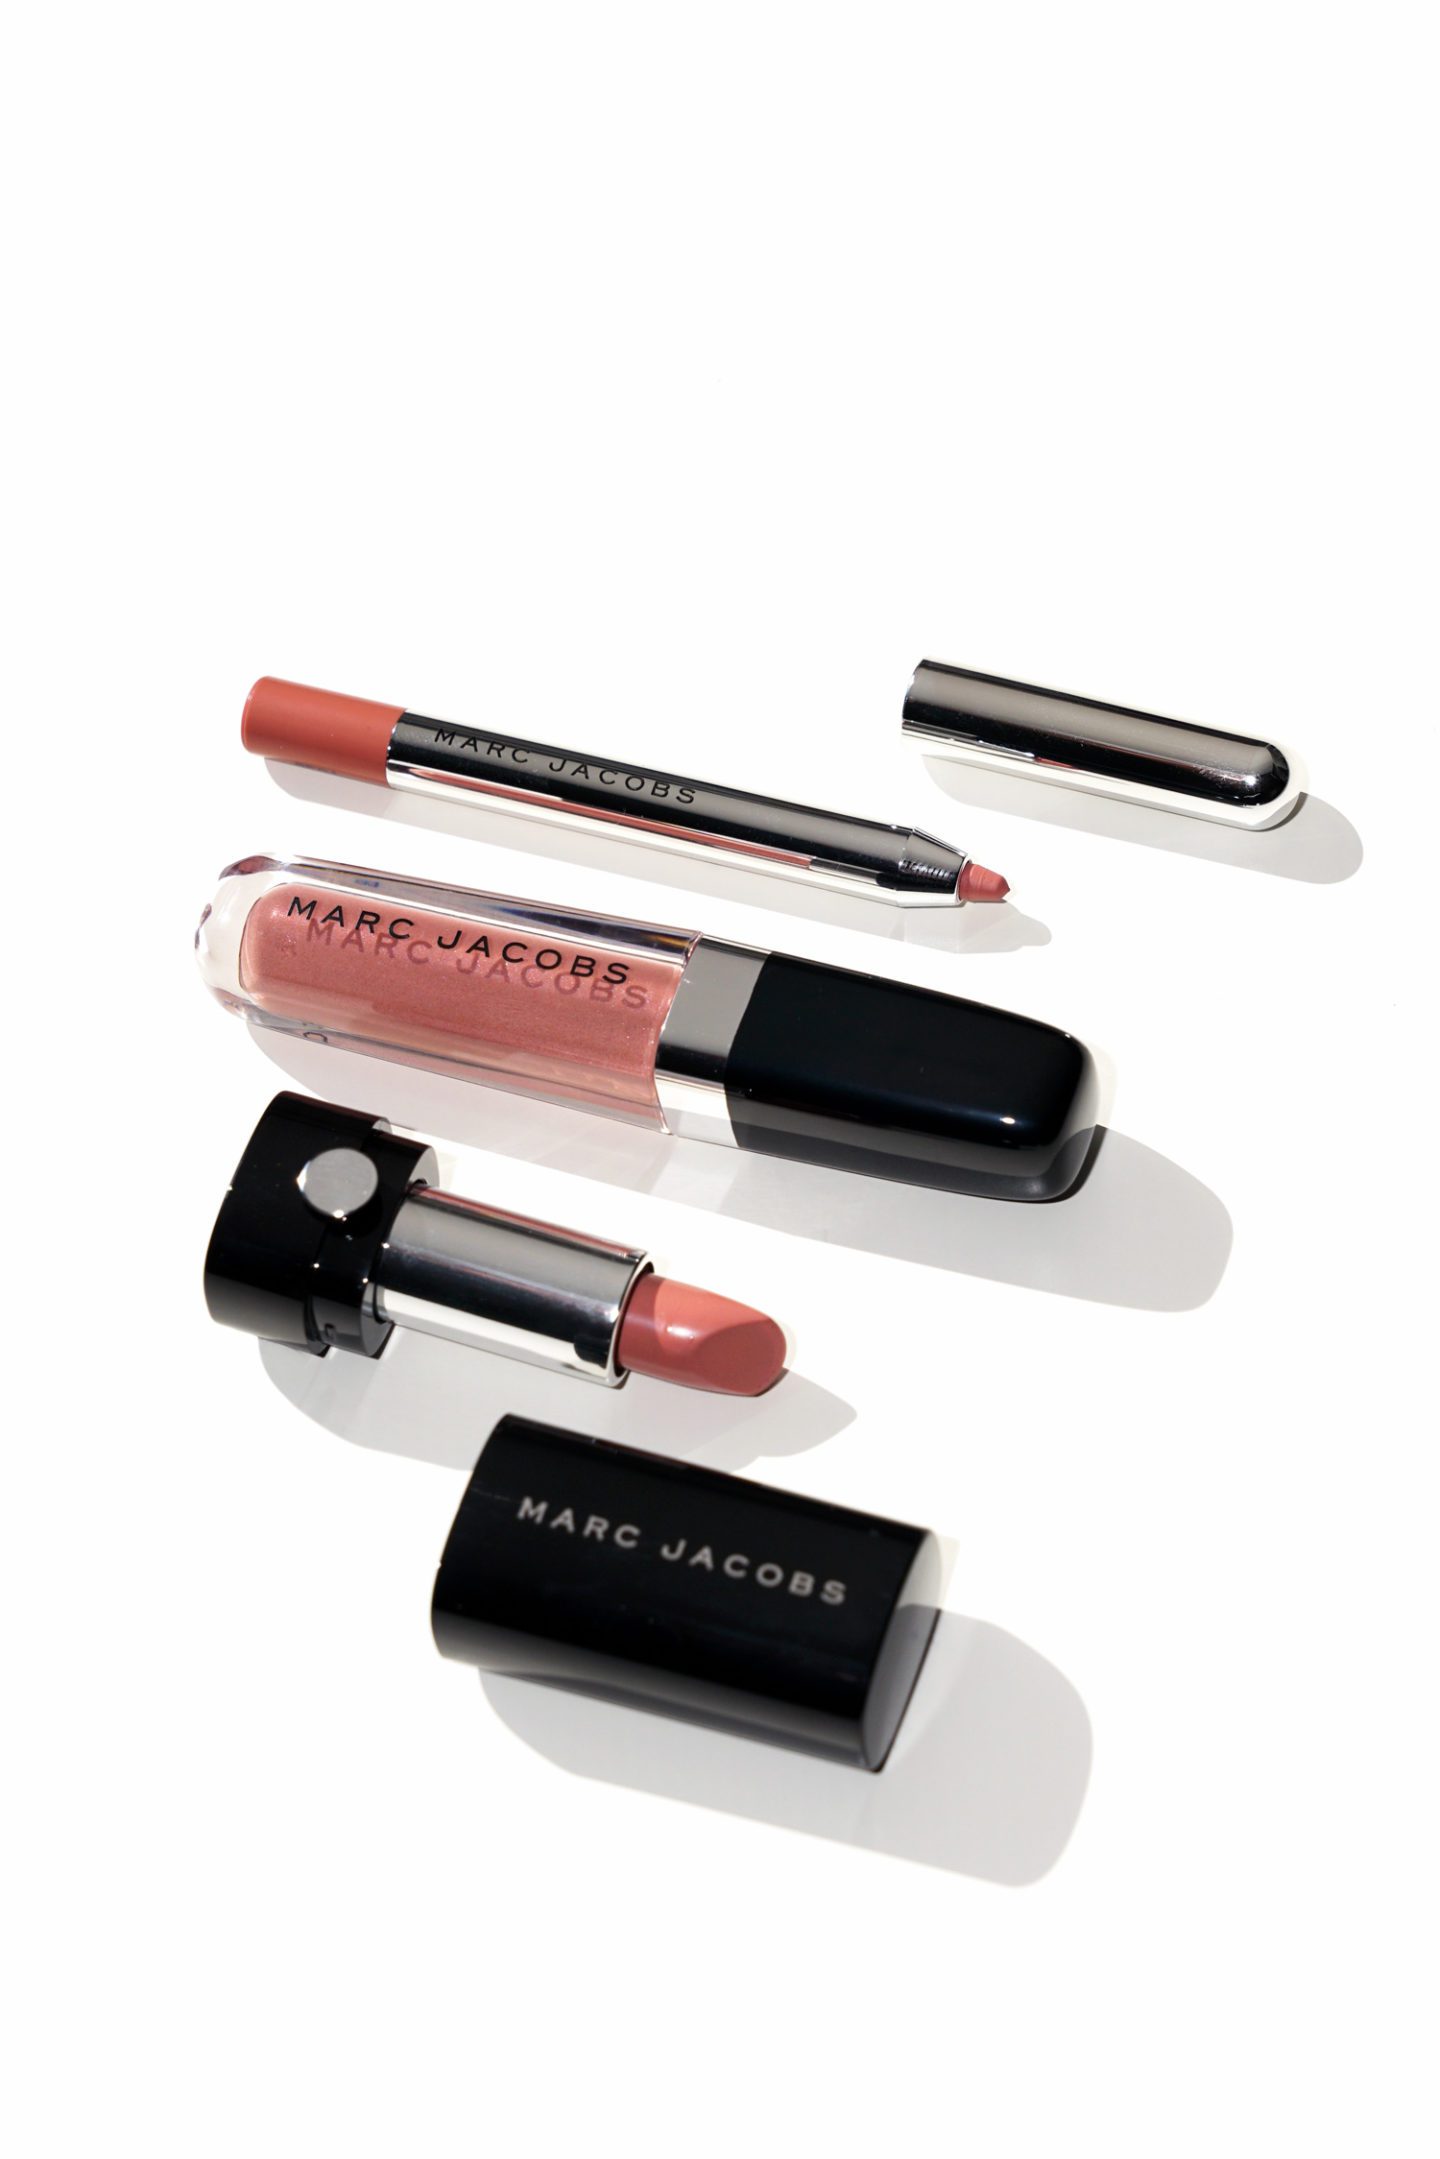 Marc Jacobs Sugar High Nude Lip Trio Review | The Beauty Look Book